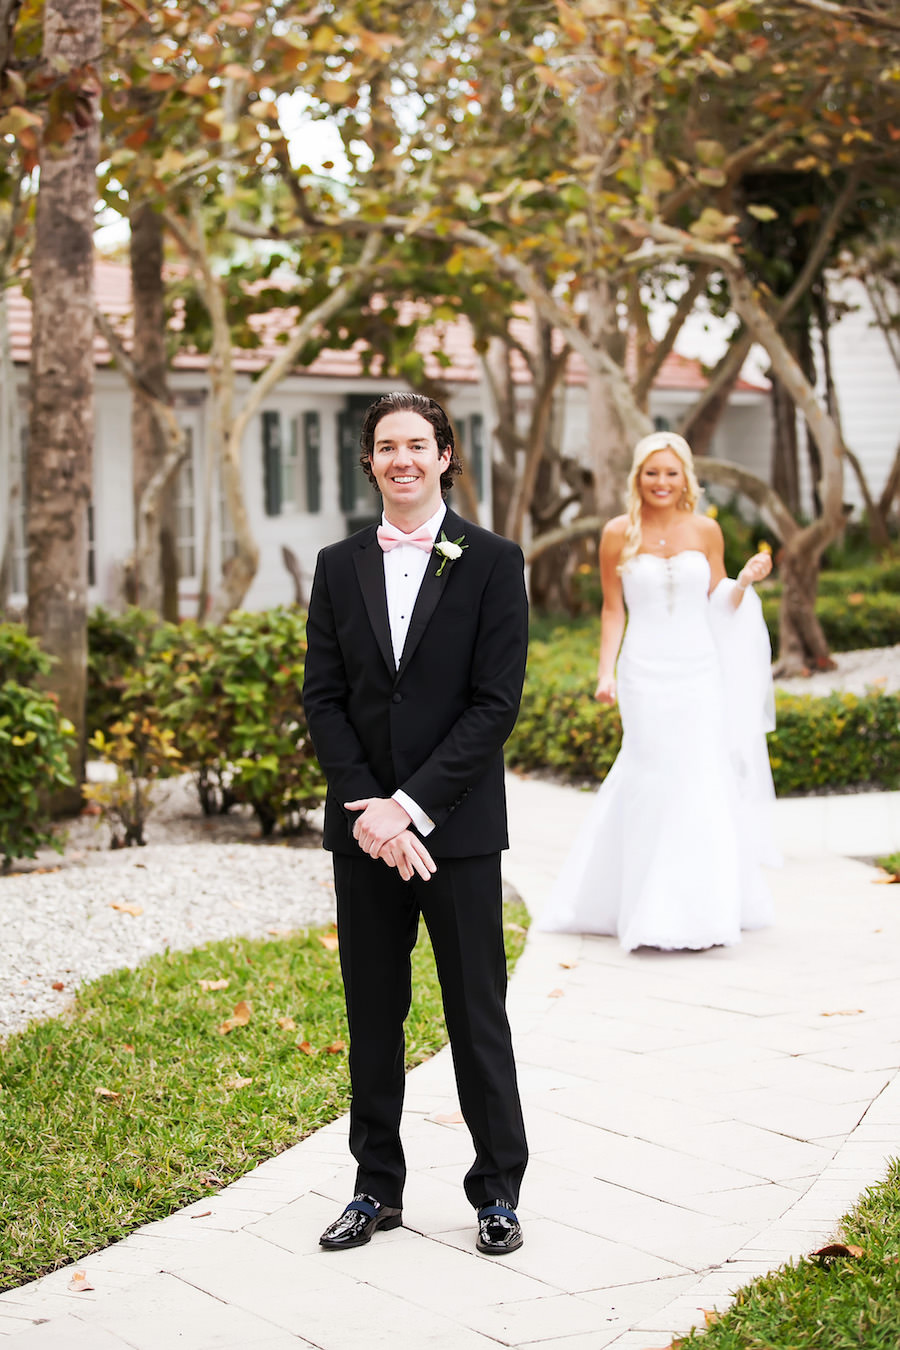 Clearwater Beach Bride and Groom First Look Wedding Portrait | Clearwater Wedding Photographer Limelight Photography